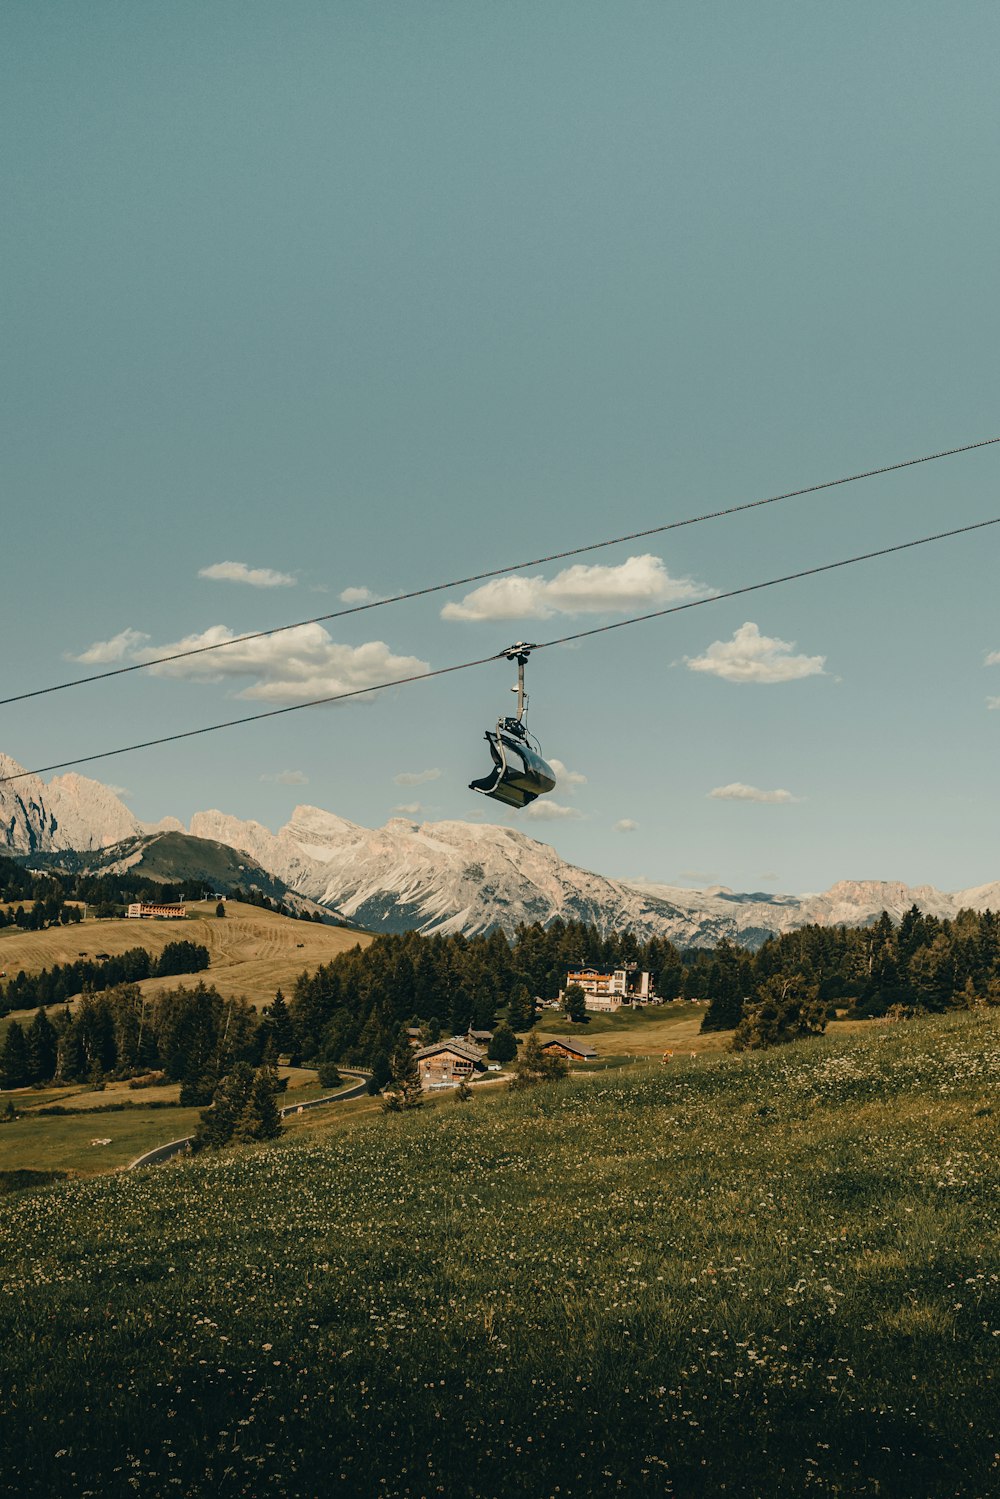 a person riding a zip line in the mountains